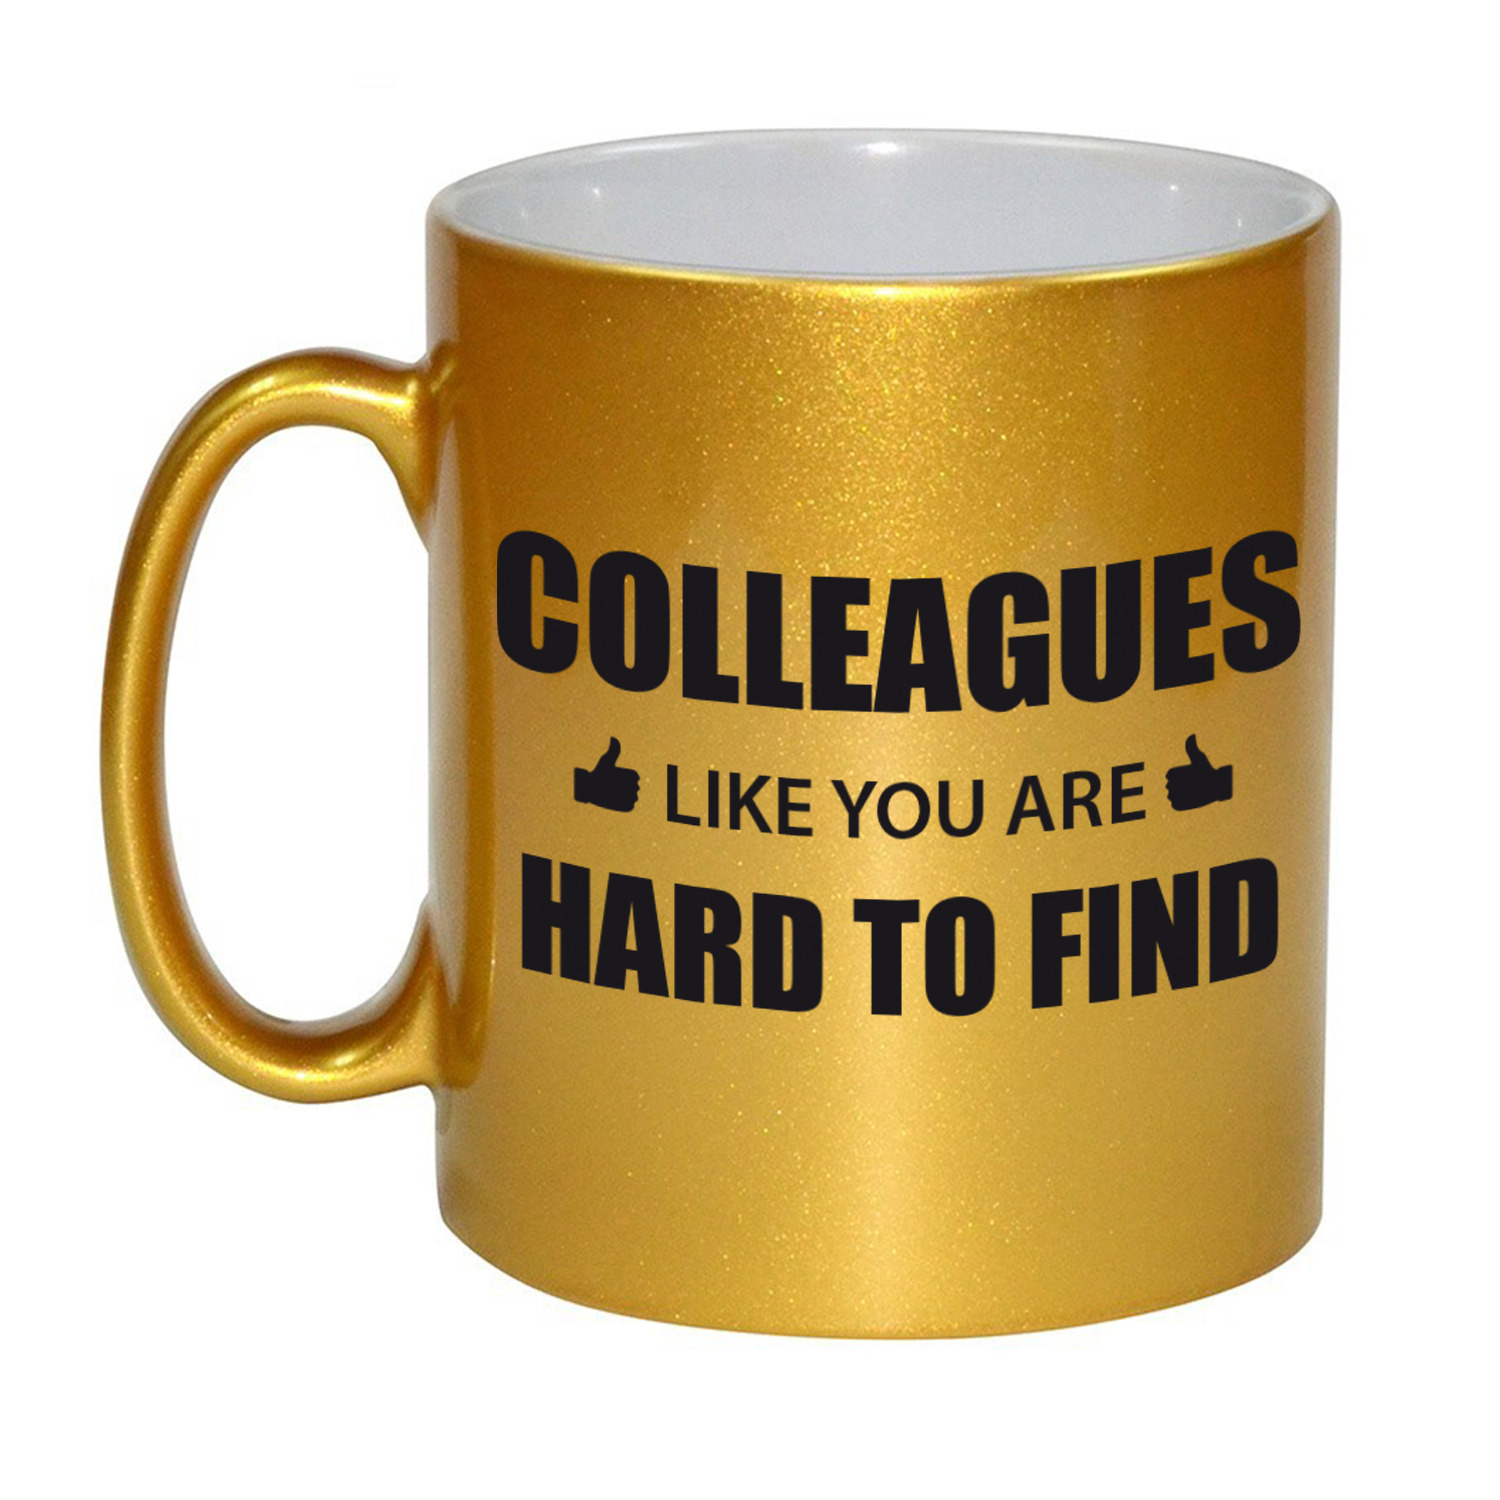 Collega cadeau mok / beker goud colleagues like you are hard to find